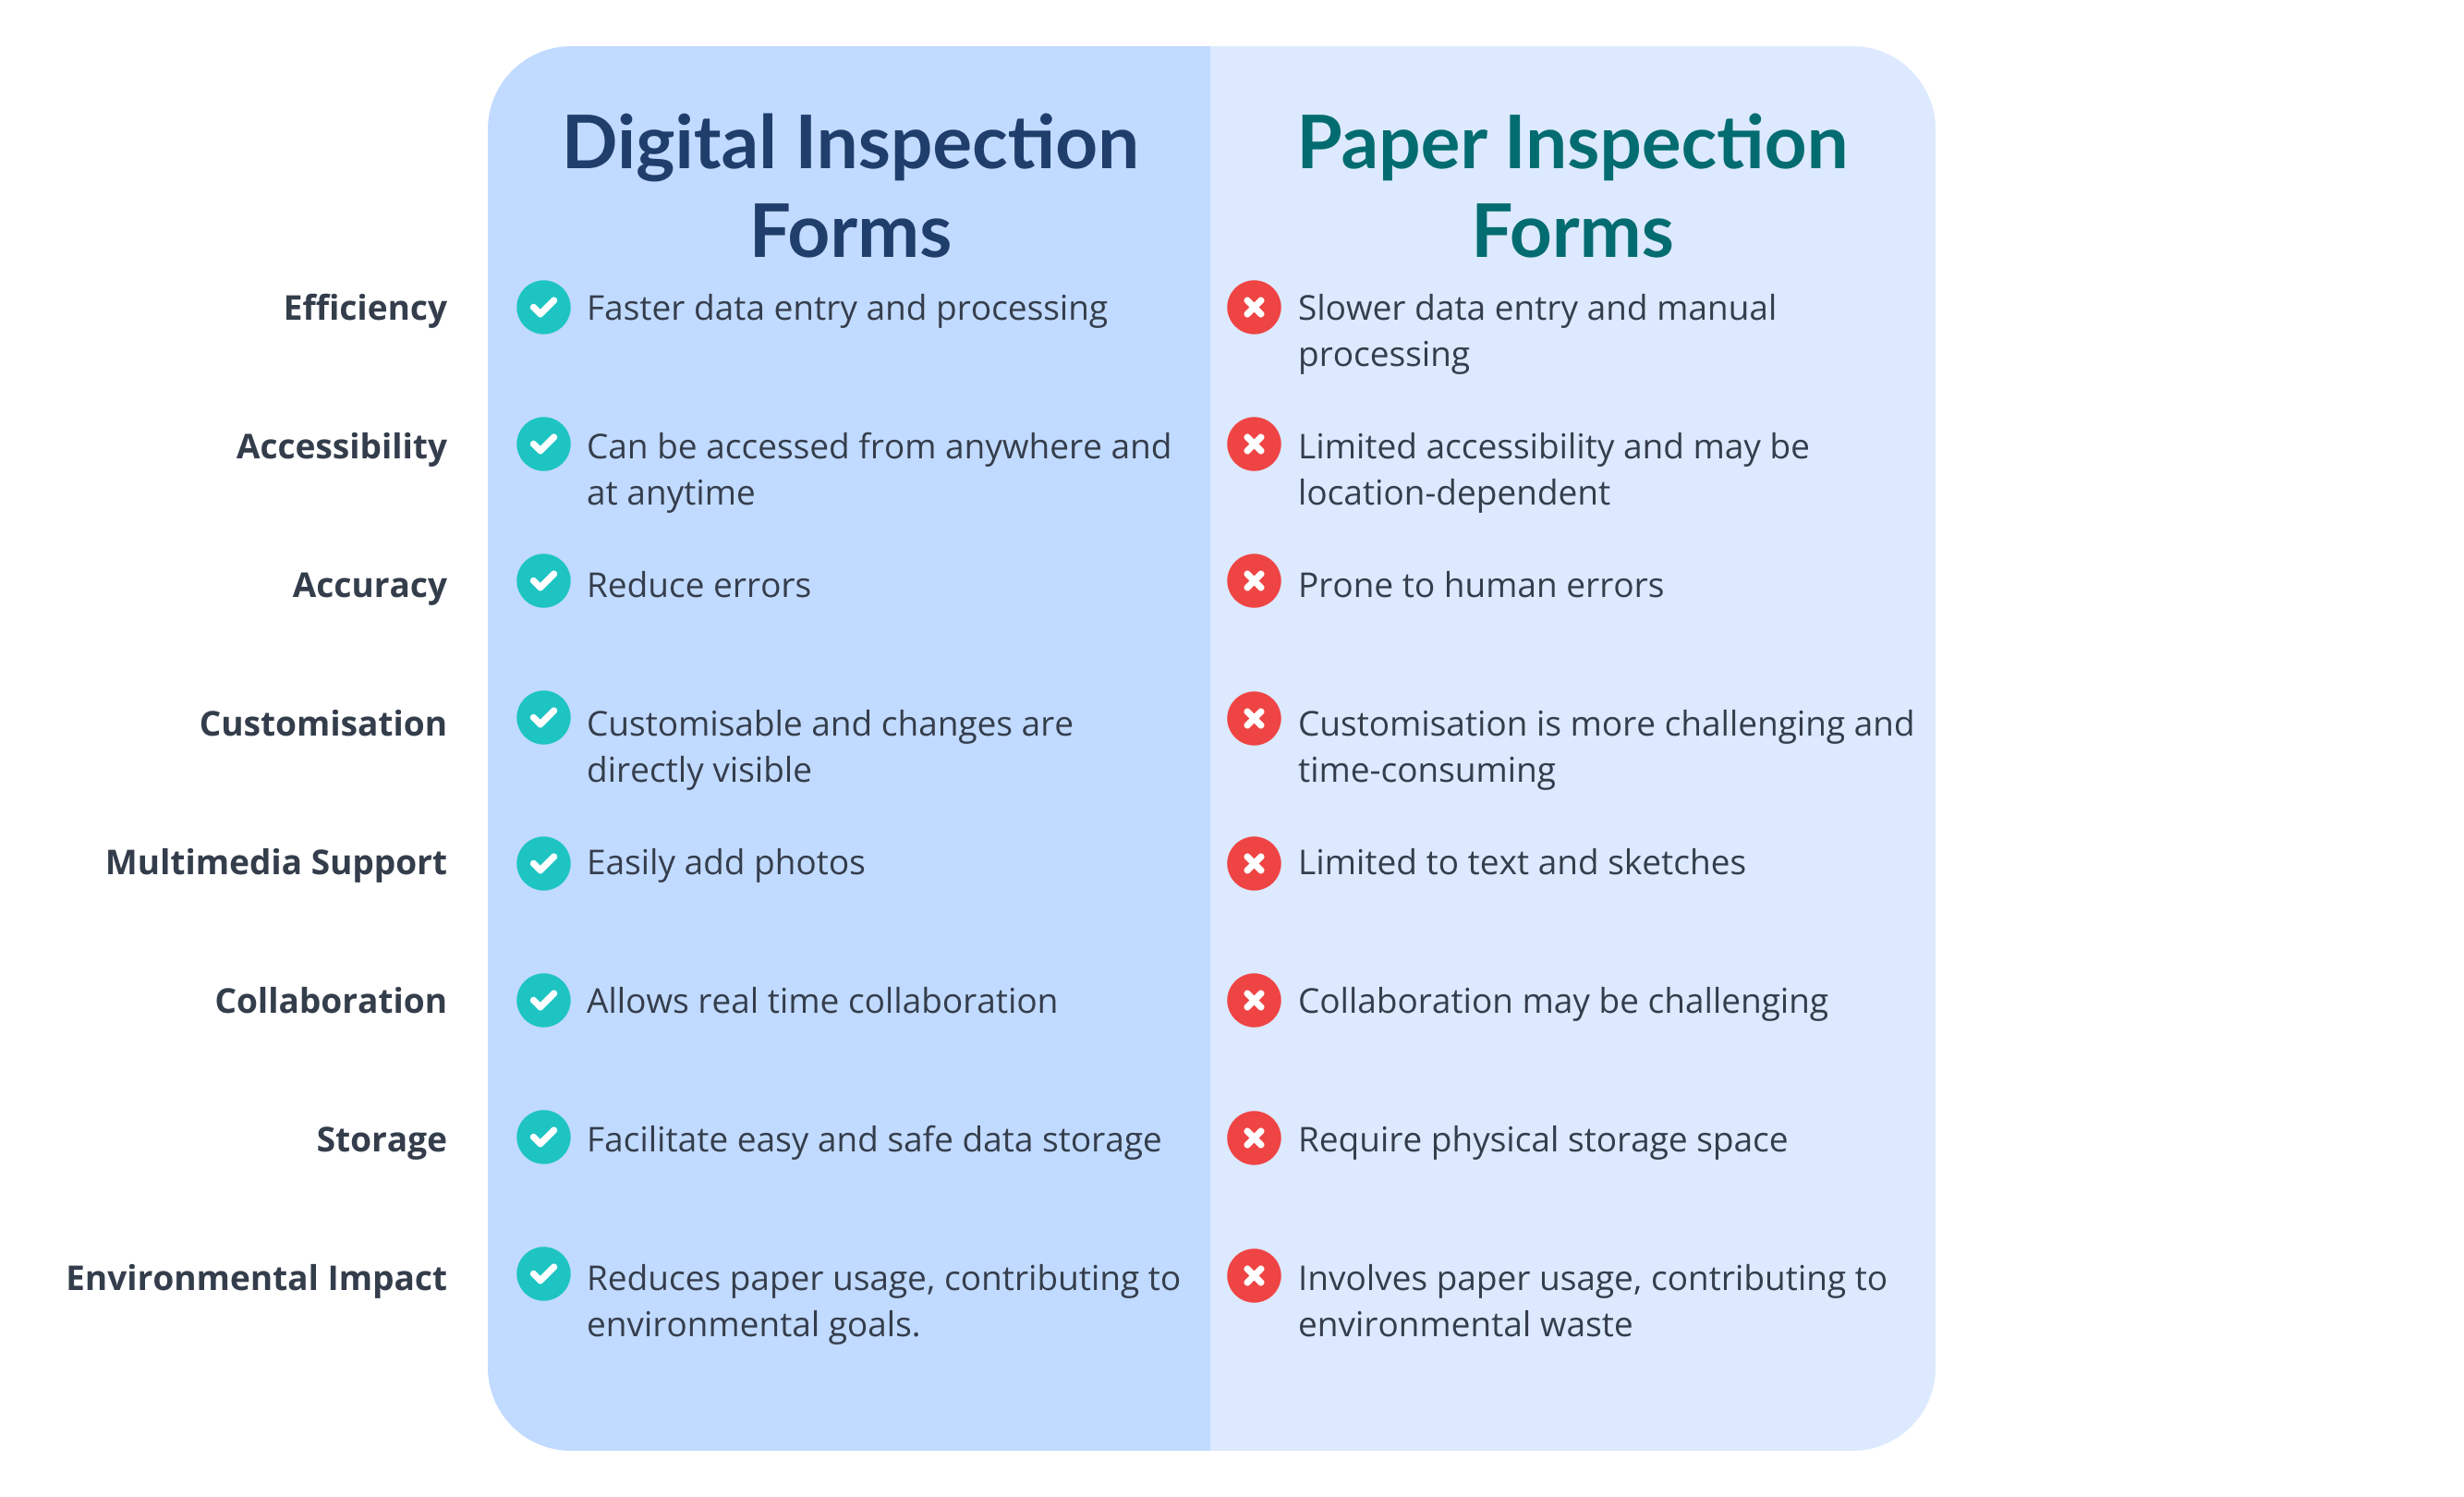 MoreApp: differences between Digital Inspection Forms and Paper Inspection Forms. 